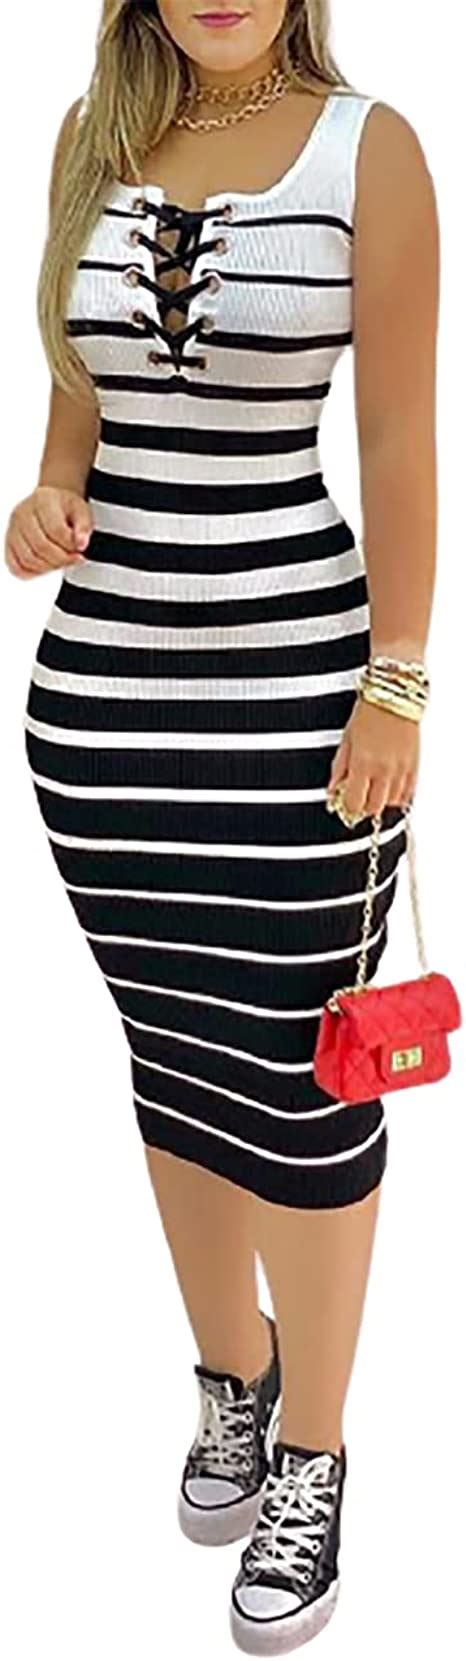 Chicme Womens Casual Striped Colorblock Lace Up Bodycon